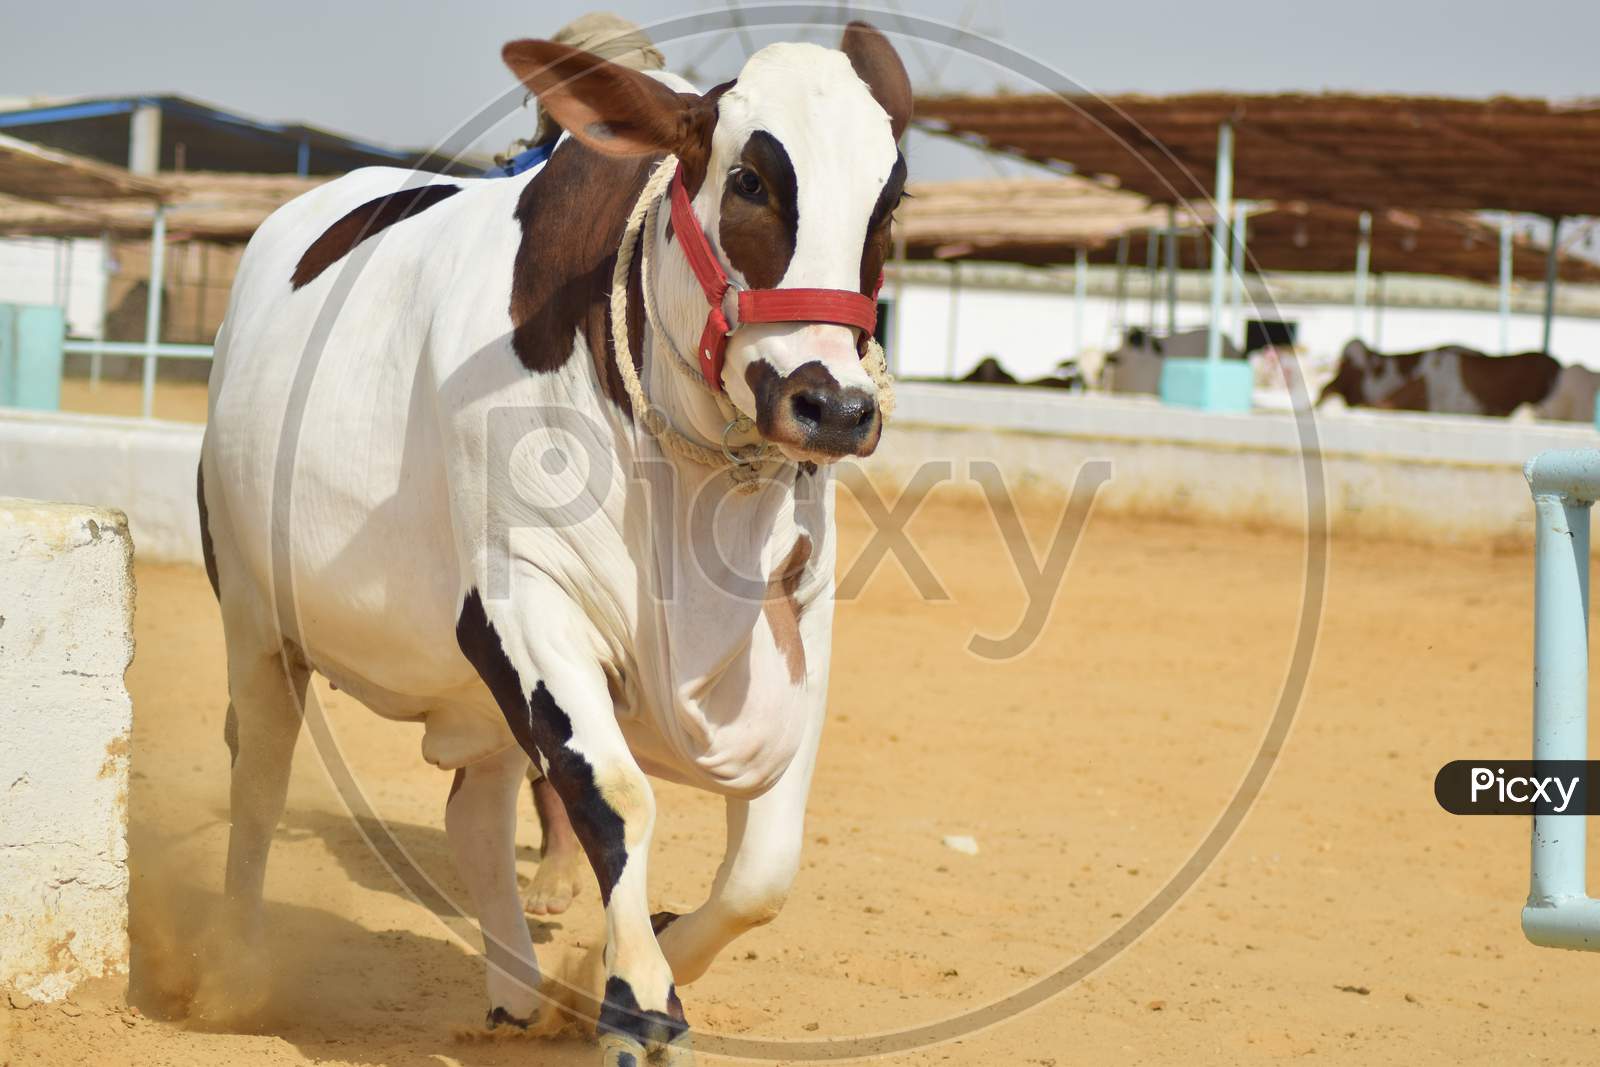 A Running Bull in the Cattle Farm